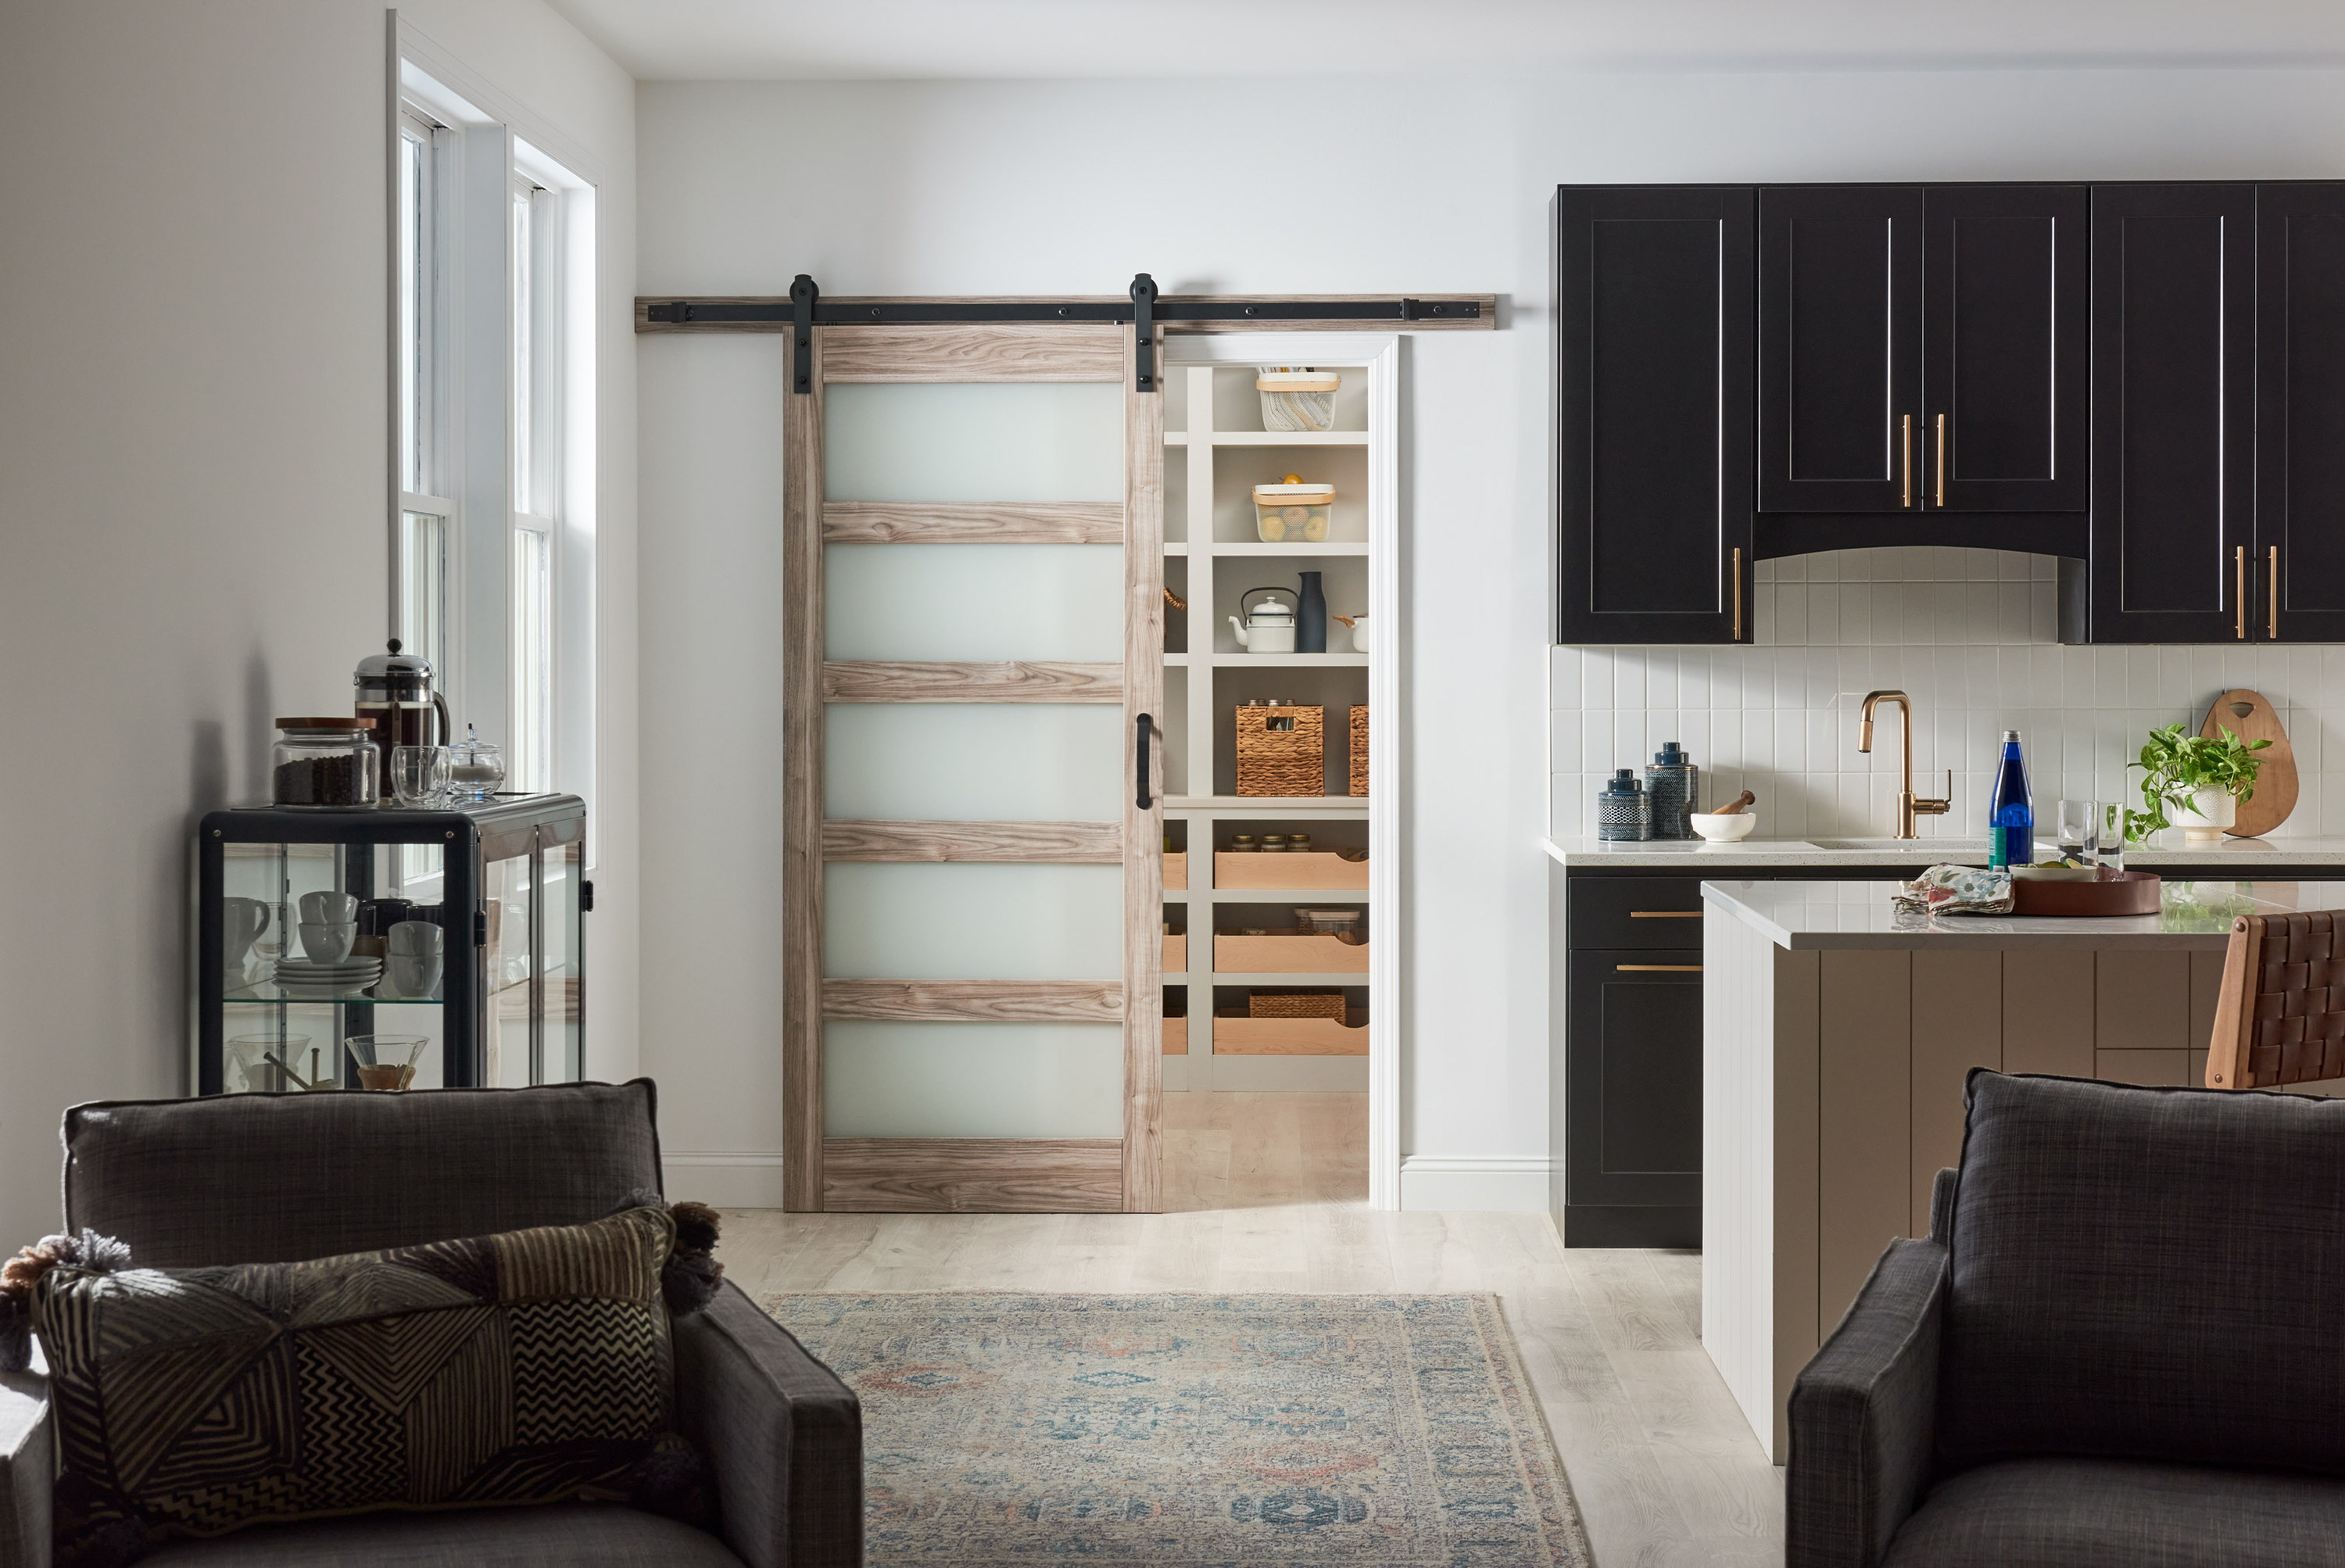 Front view of a transitional style lite ash grey 5-lite barn door with glass inserts leading to a pantry in a kitchen with black cabinets. There is a carpet on the wooden floor behind two dark brown cloth armchairs.